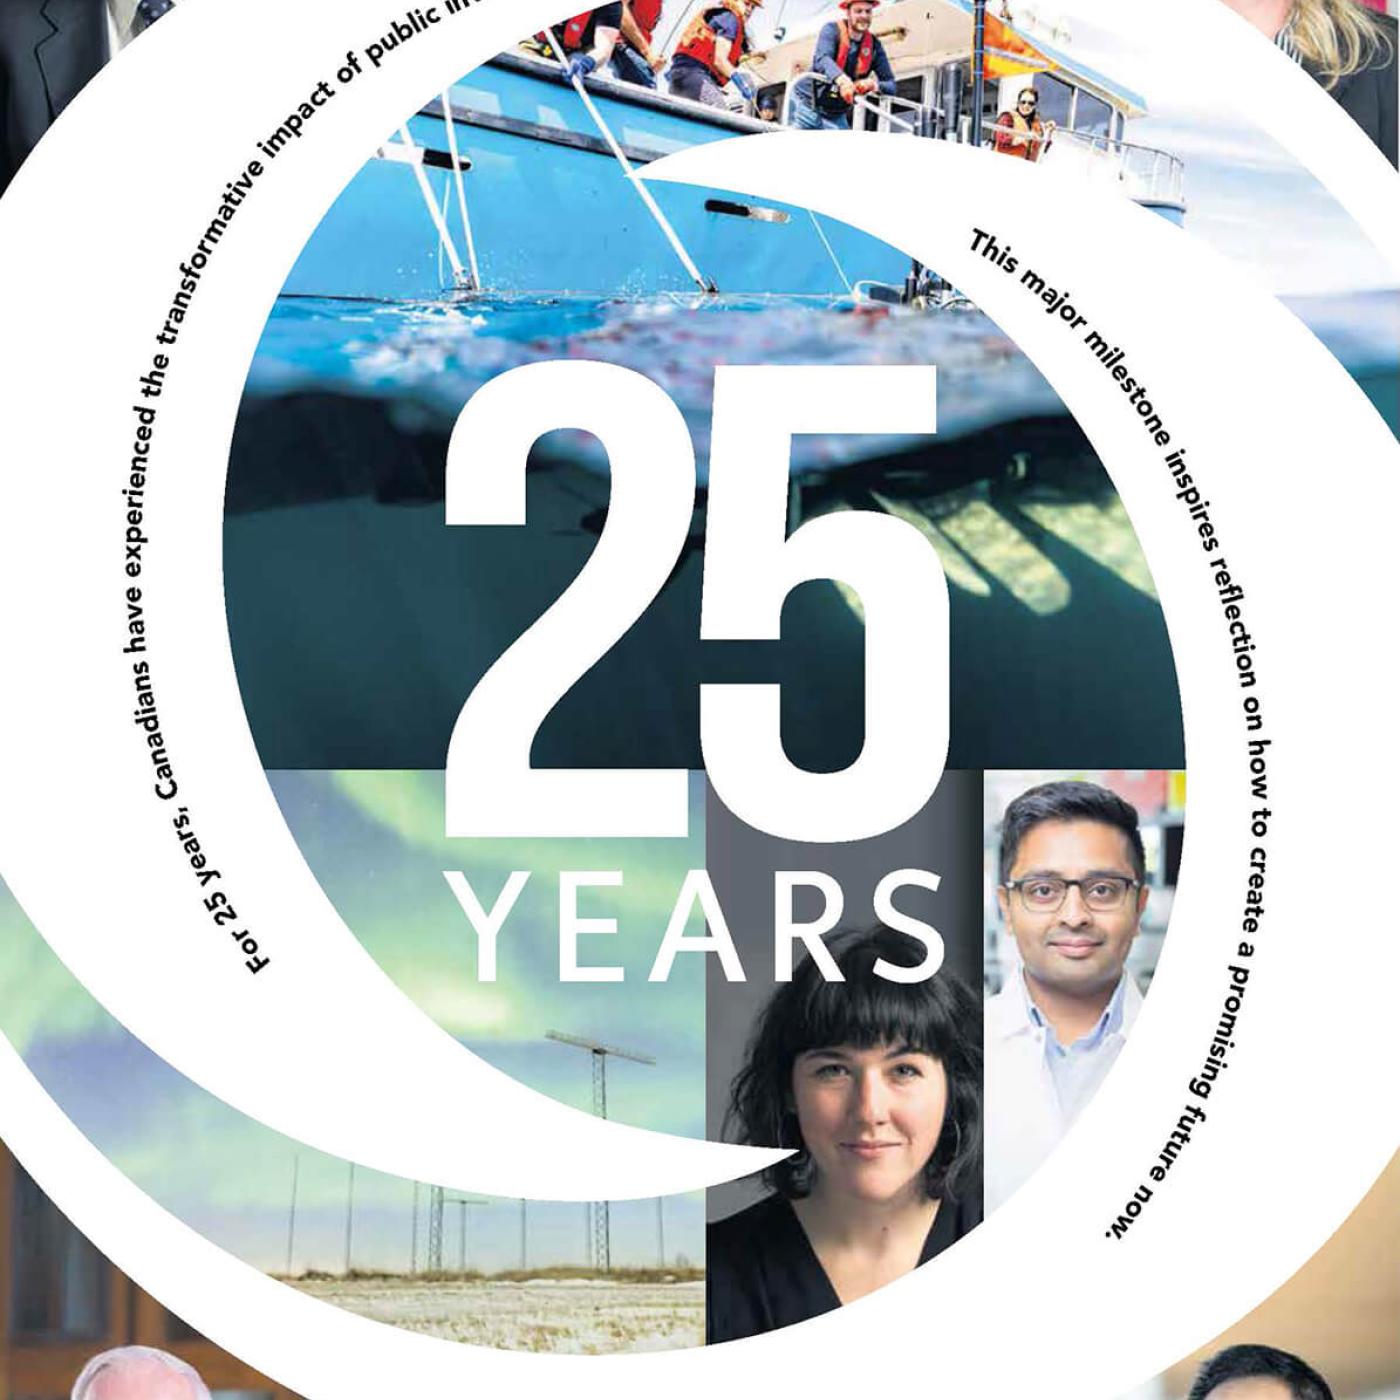 A front page cover of a newspaper featuring a white version of the official CFI logo overlayed over a collage of photos featuring researchers and research facilities. The words "25 years" are centered inside the logo.